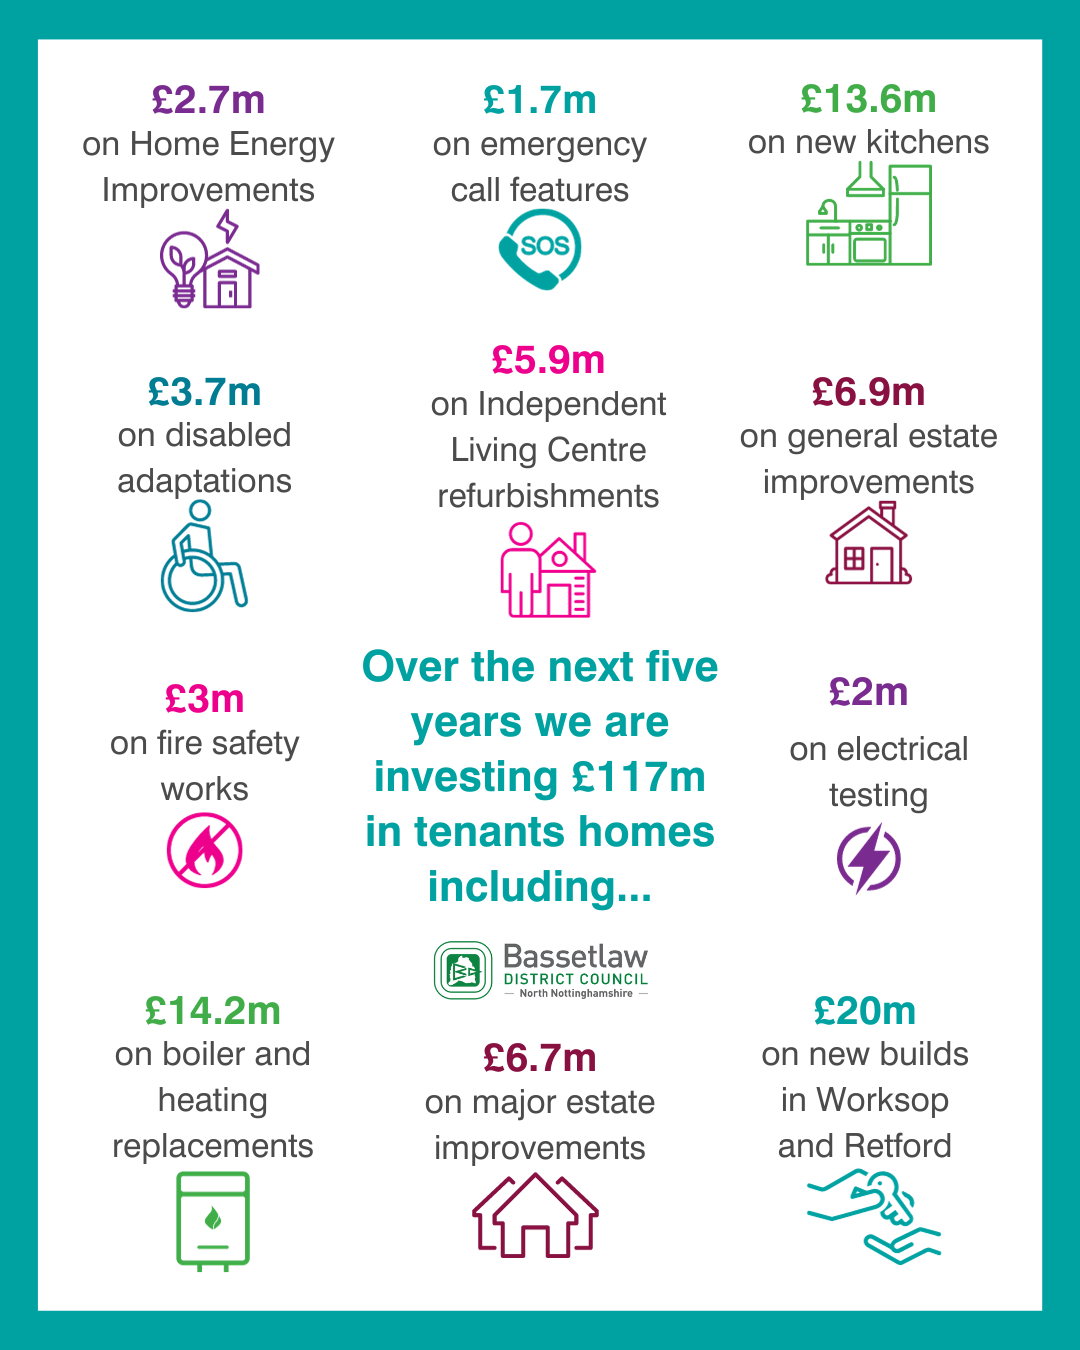 Multi-million investment in tenants’ homes